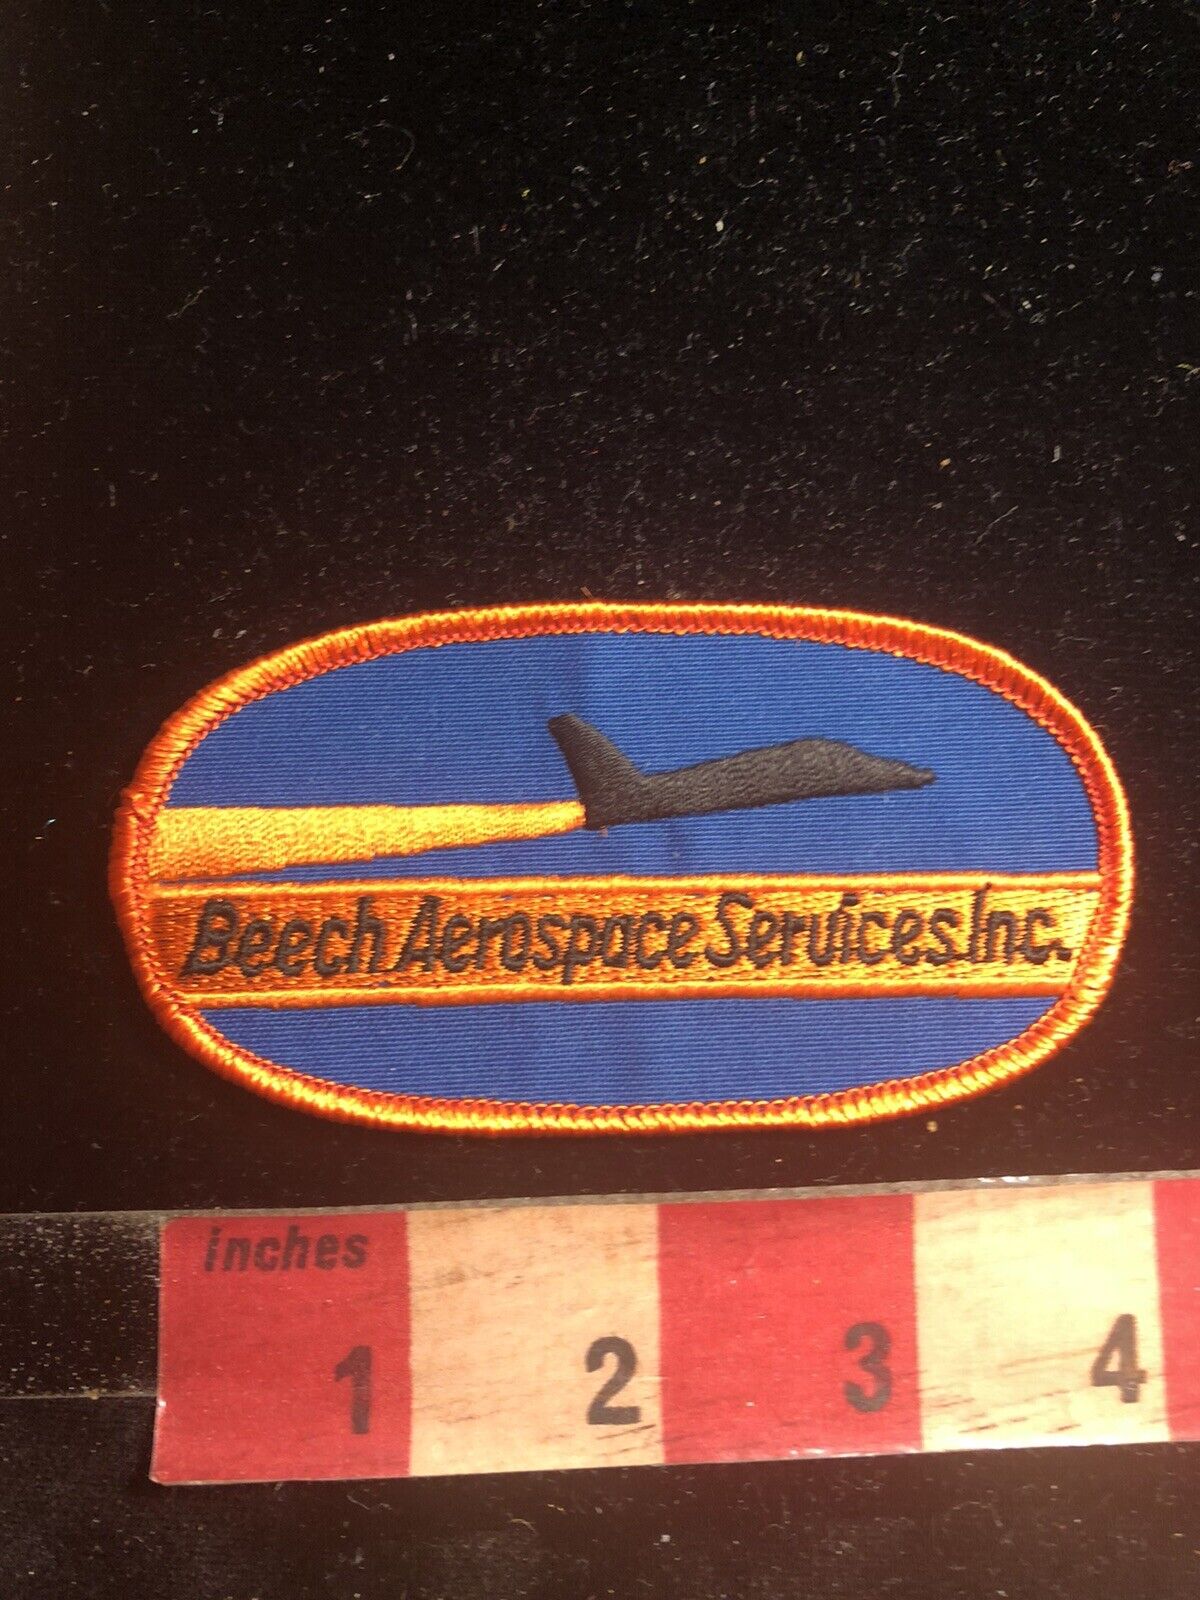 Ver2 BEECH AEROSPACE SERVICES INC Airplane Related Patch Beechcraft Textron 99M7